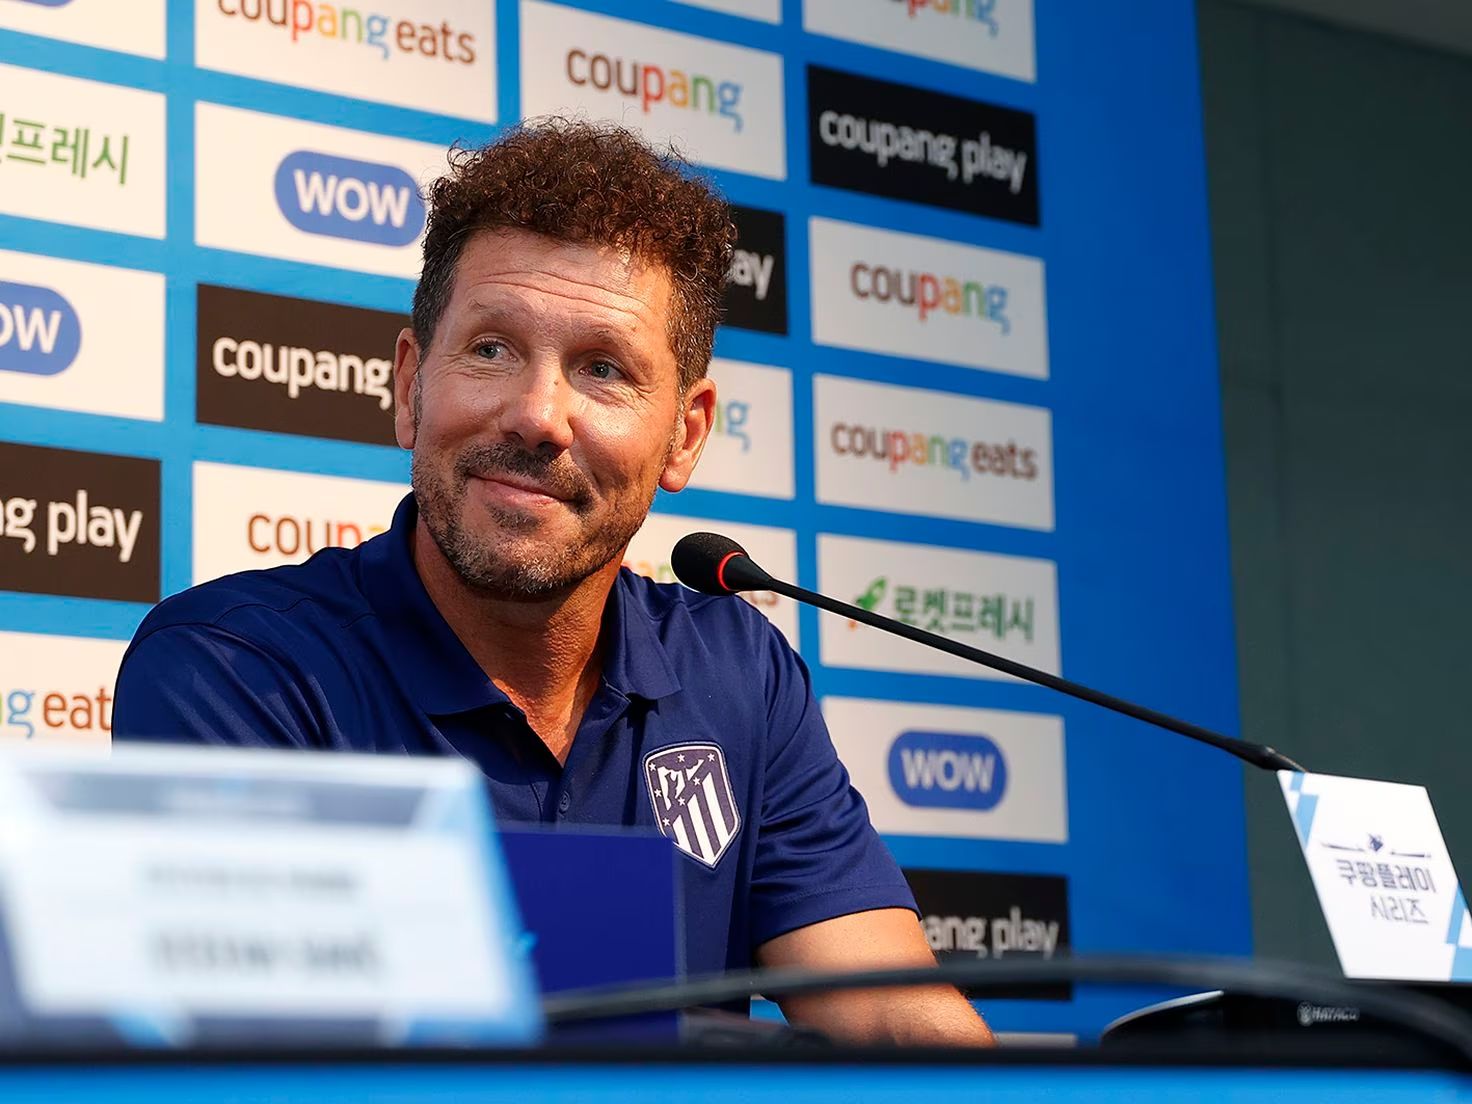 Diego Simeone confirms Atletico Madrid star to miss Real Sociedad clash – “We hope he recovers”